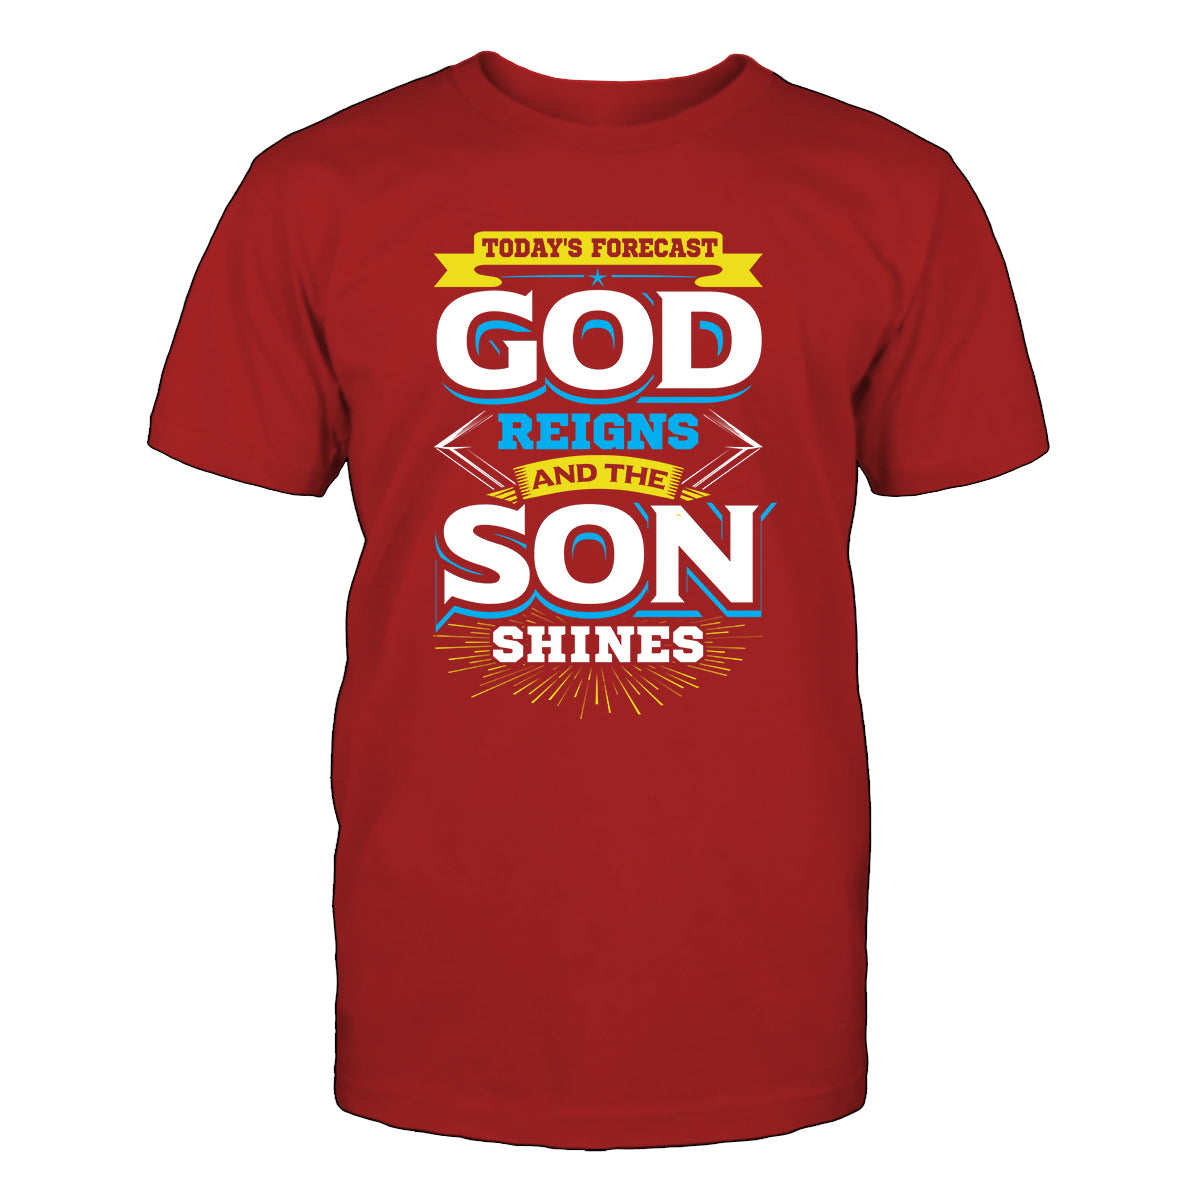 God Reigns And The Son Shines T-Shirt